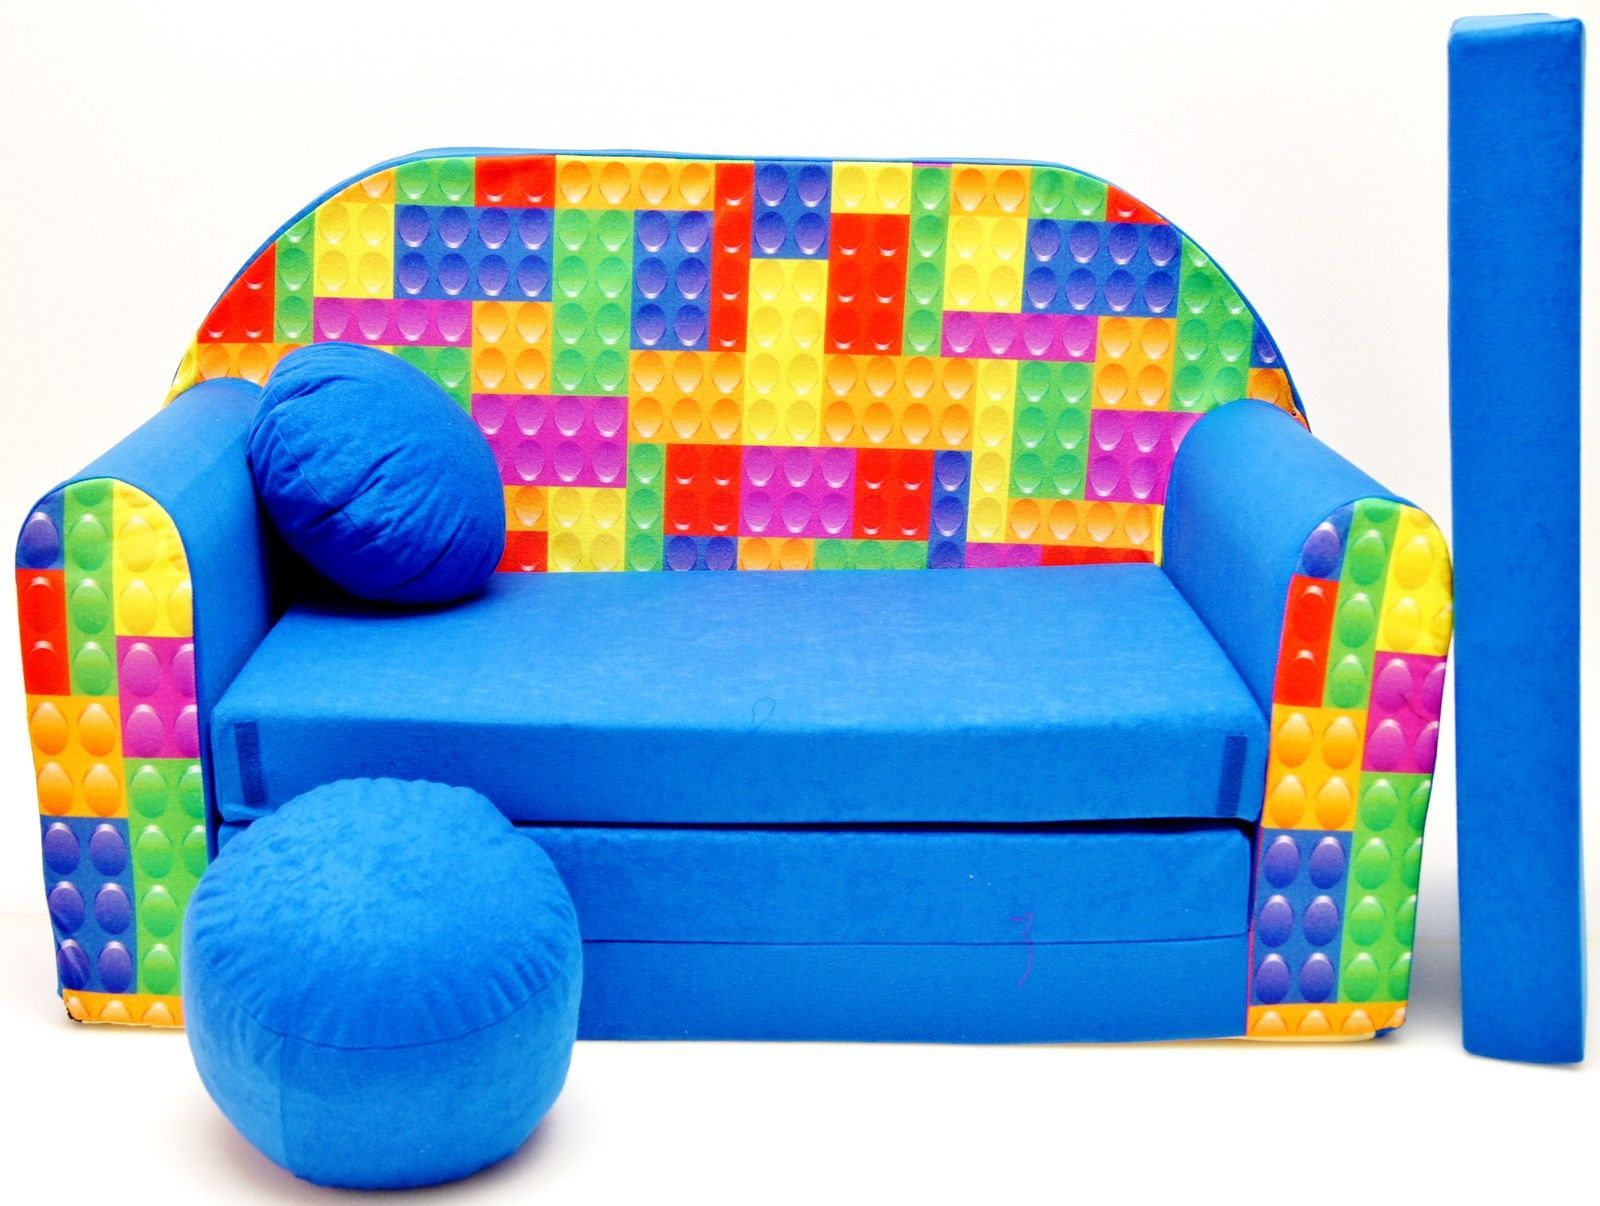 Childrens Sofa Bed Type W, Fold Out Sofa Foam Bed For Children + Free  Pillow And Pouffe – Wc32 – Ppg4kids.co.uk – Strollers And More! With Regard To Children's Sofa Beds (Photo 4 of 15)